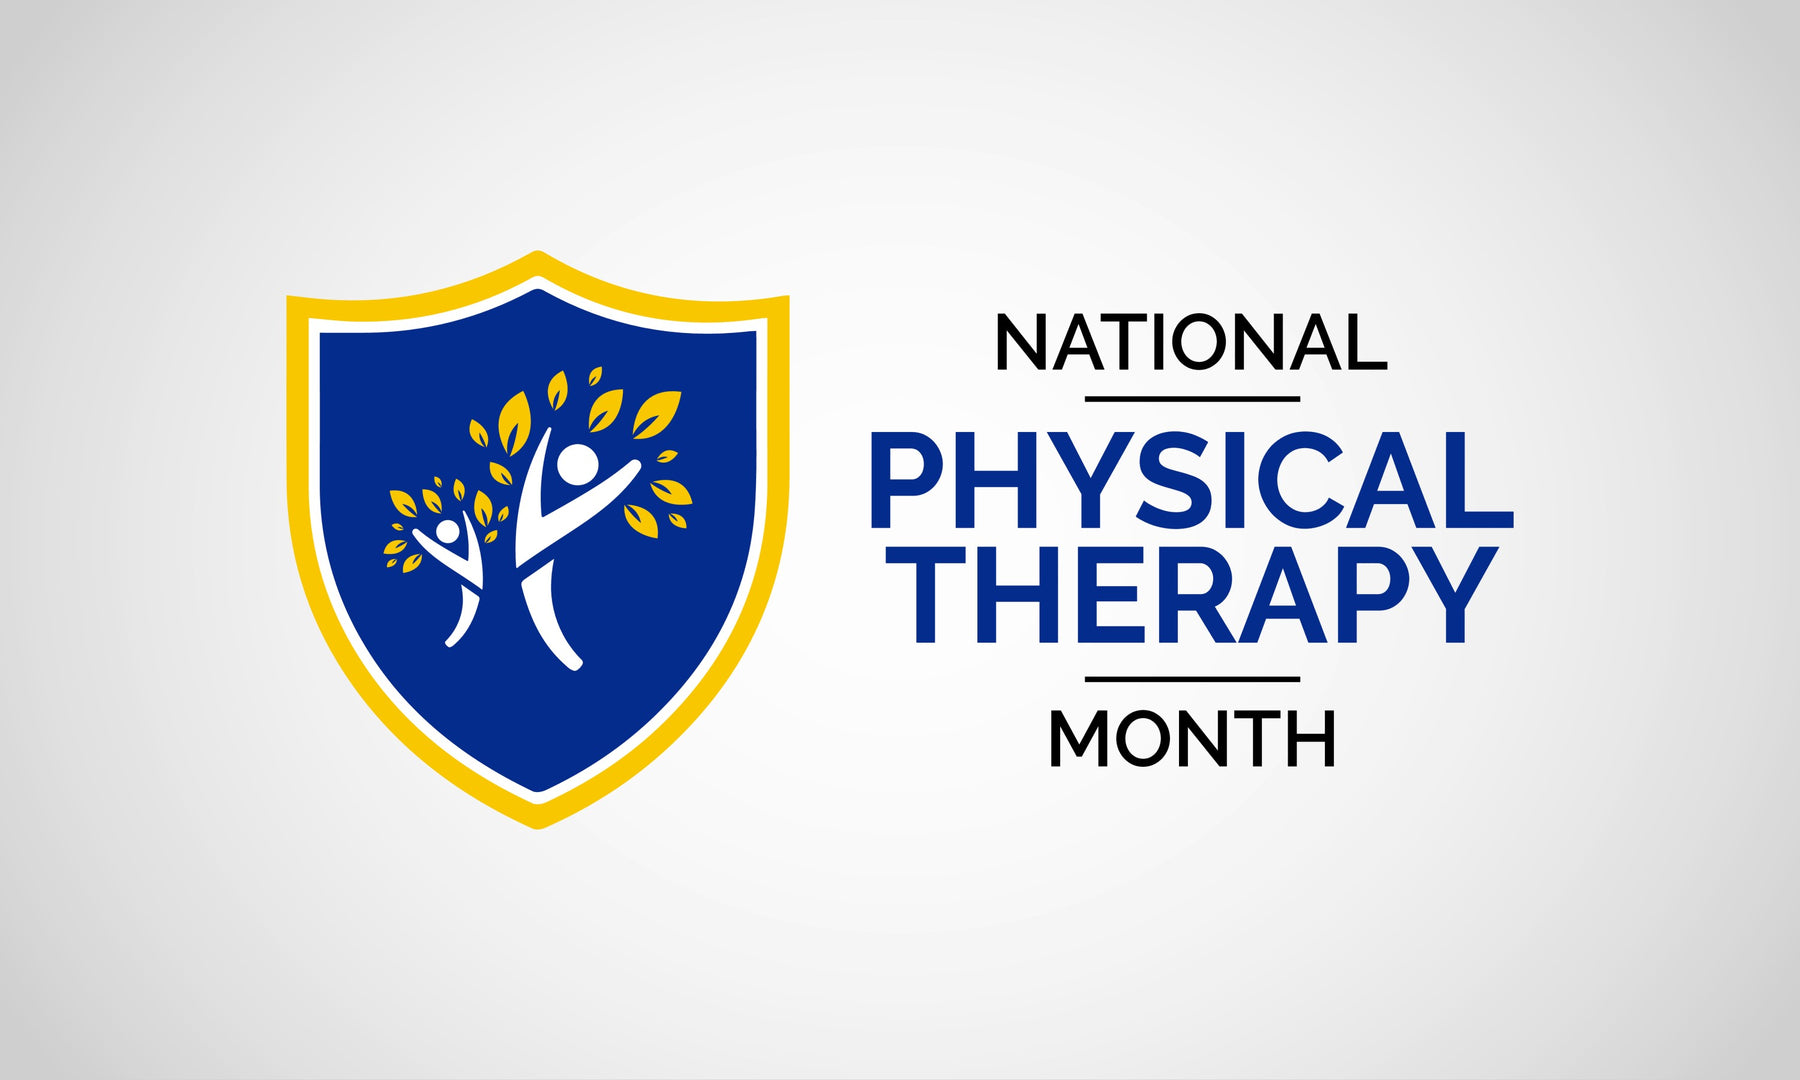 National Physical Therapy Month 2020